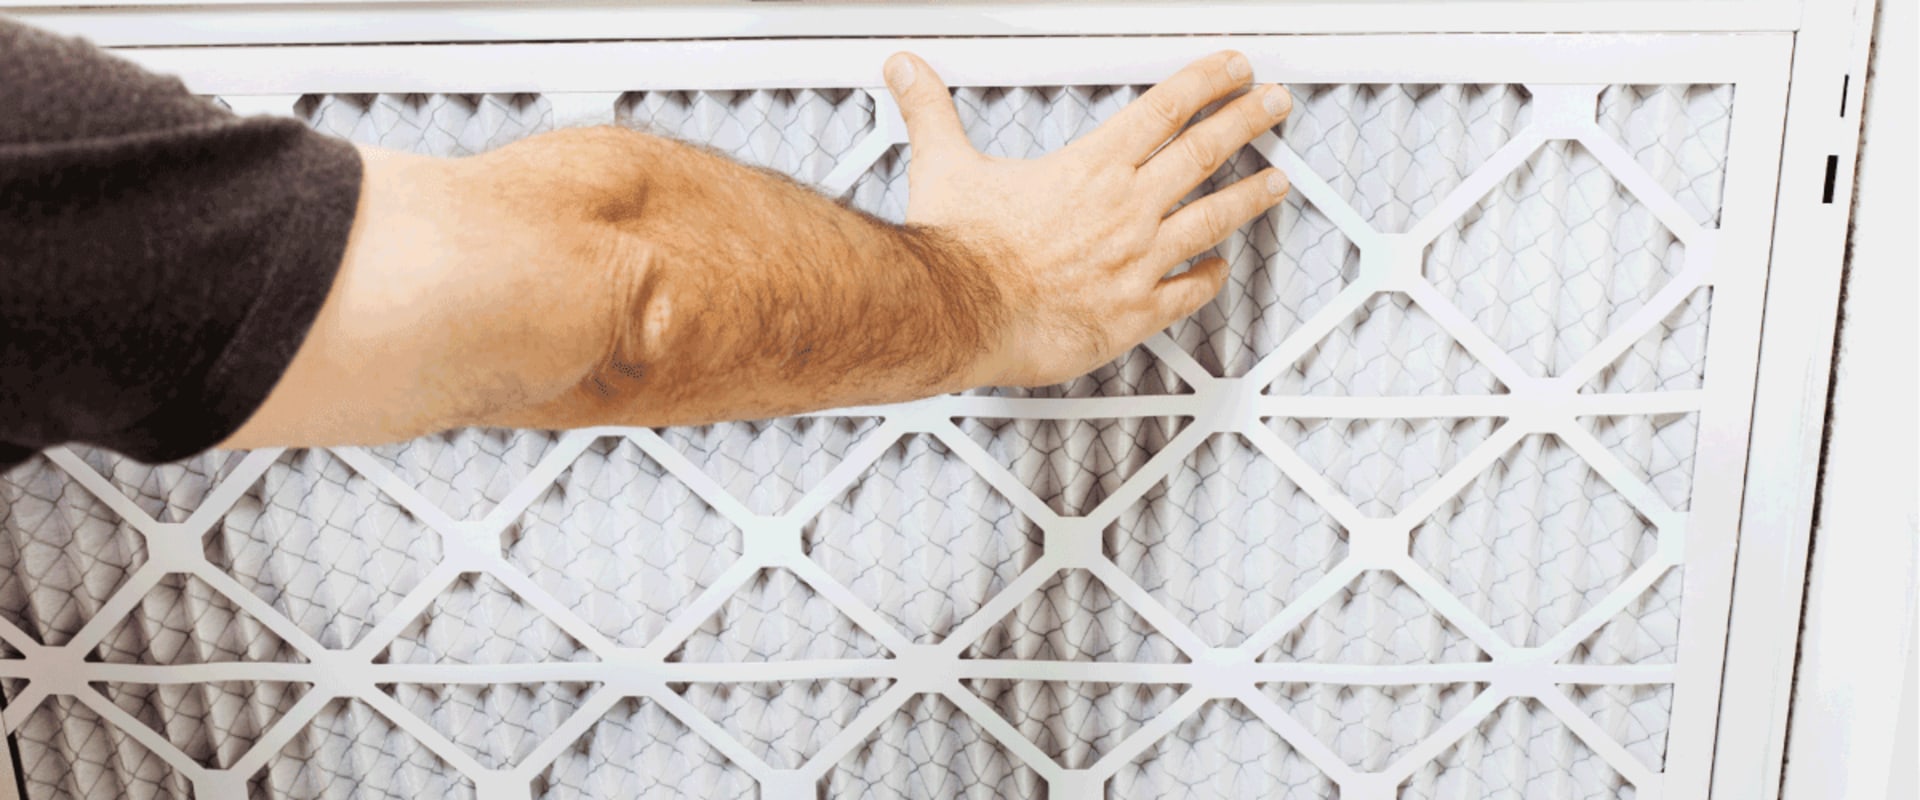 Where to Find Your Home's Air Filter